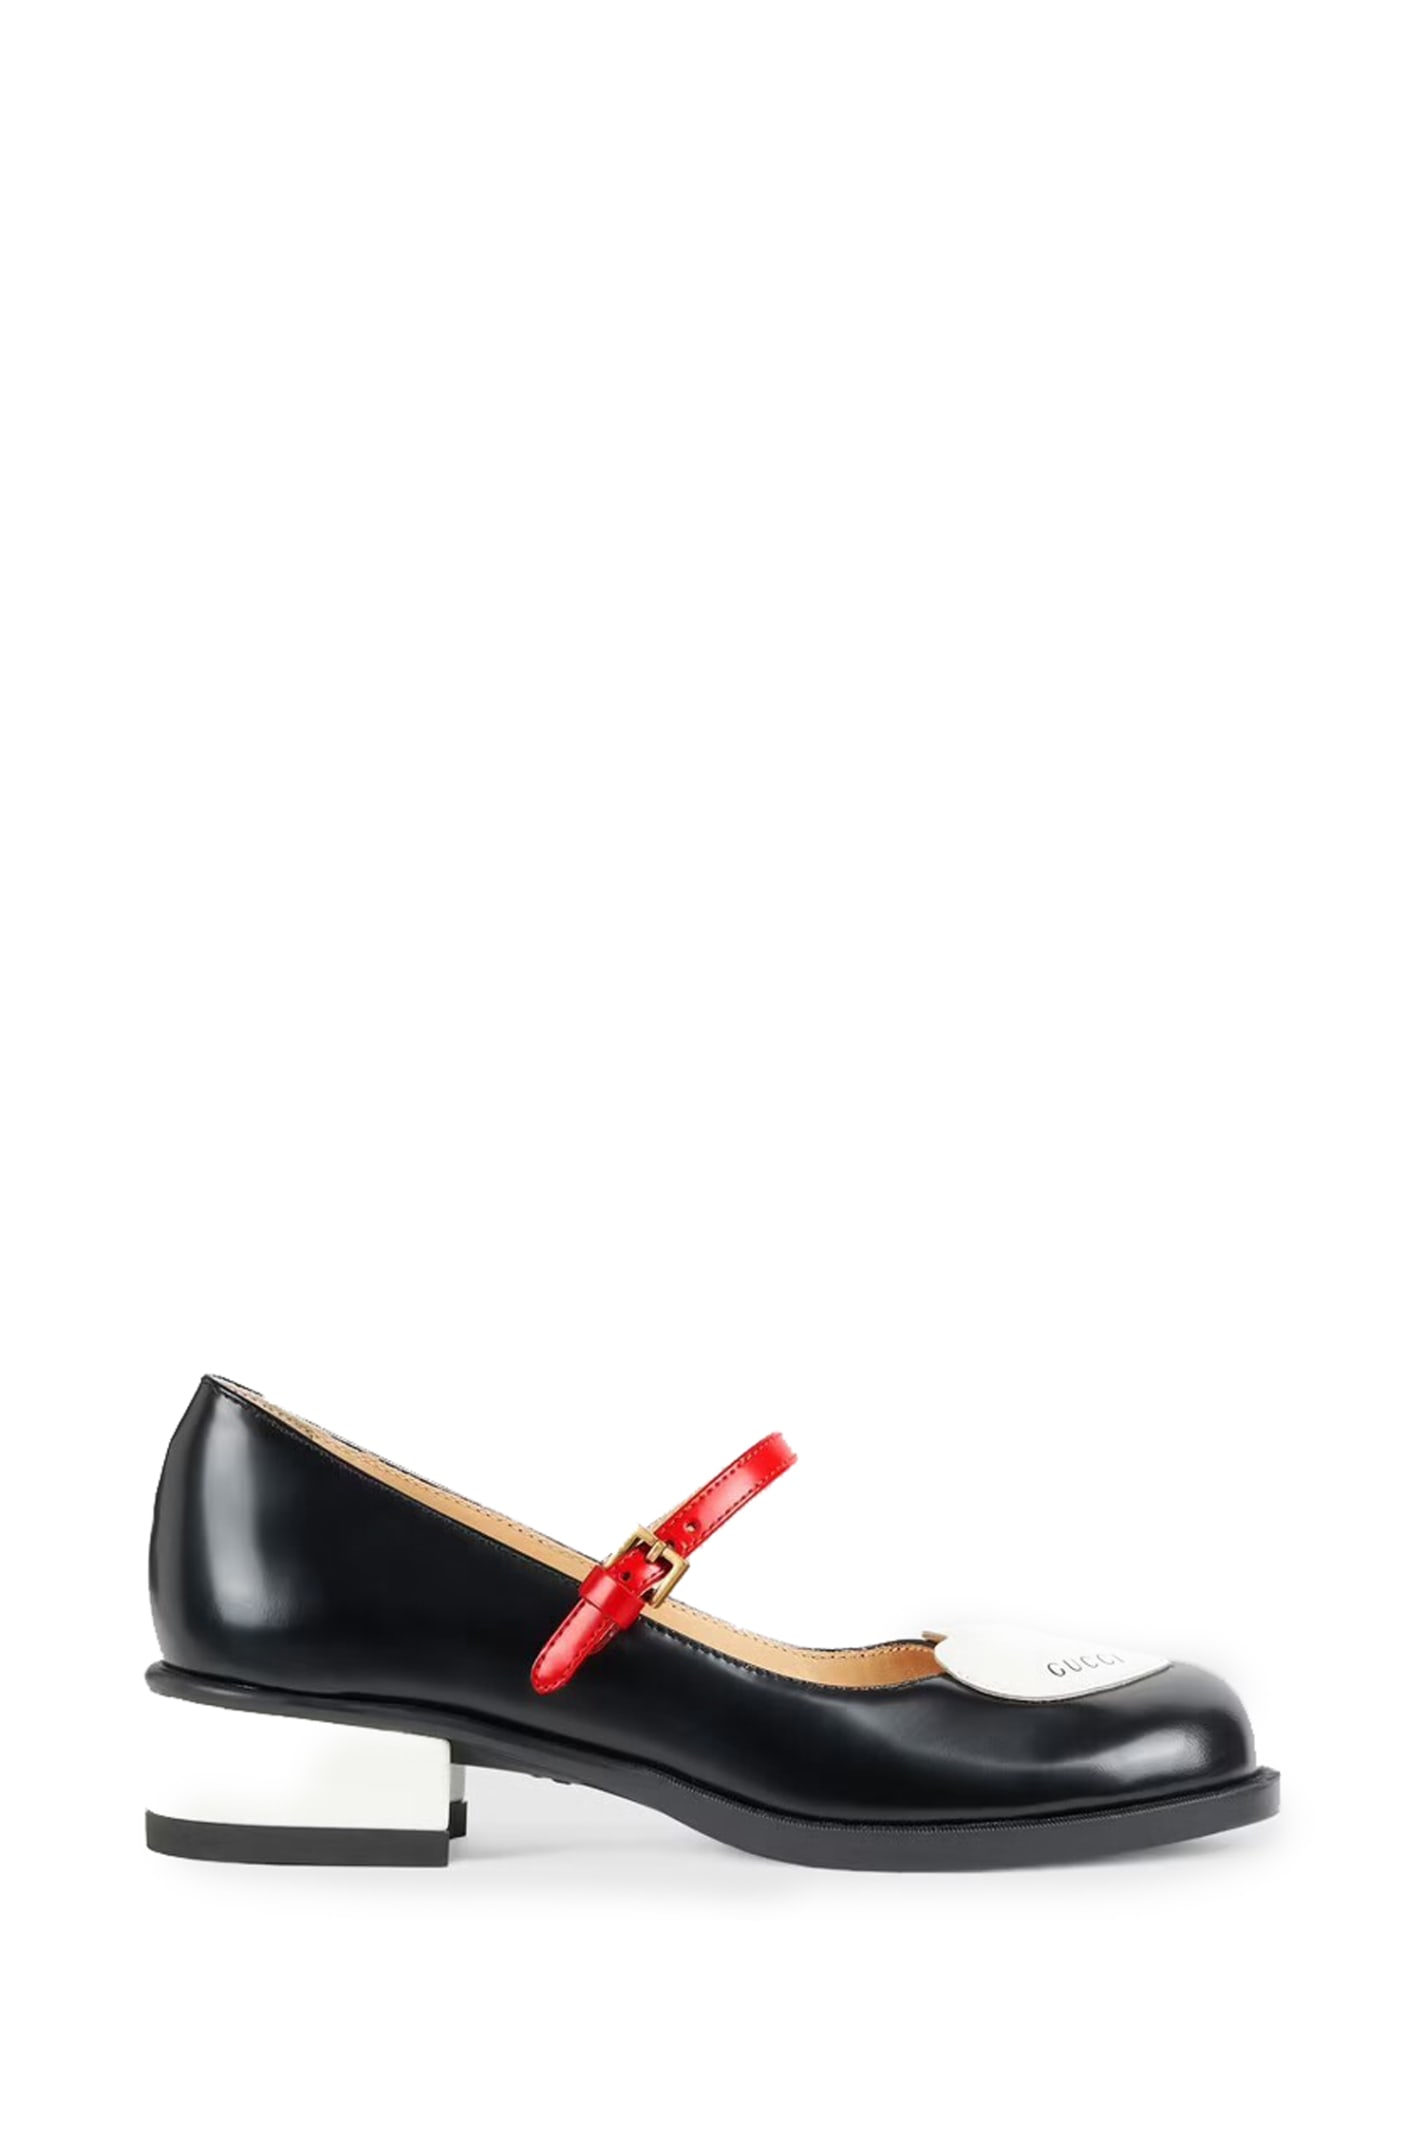 Gucci Leather Ballet Flats